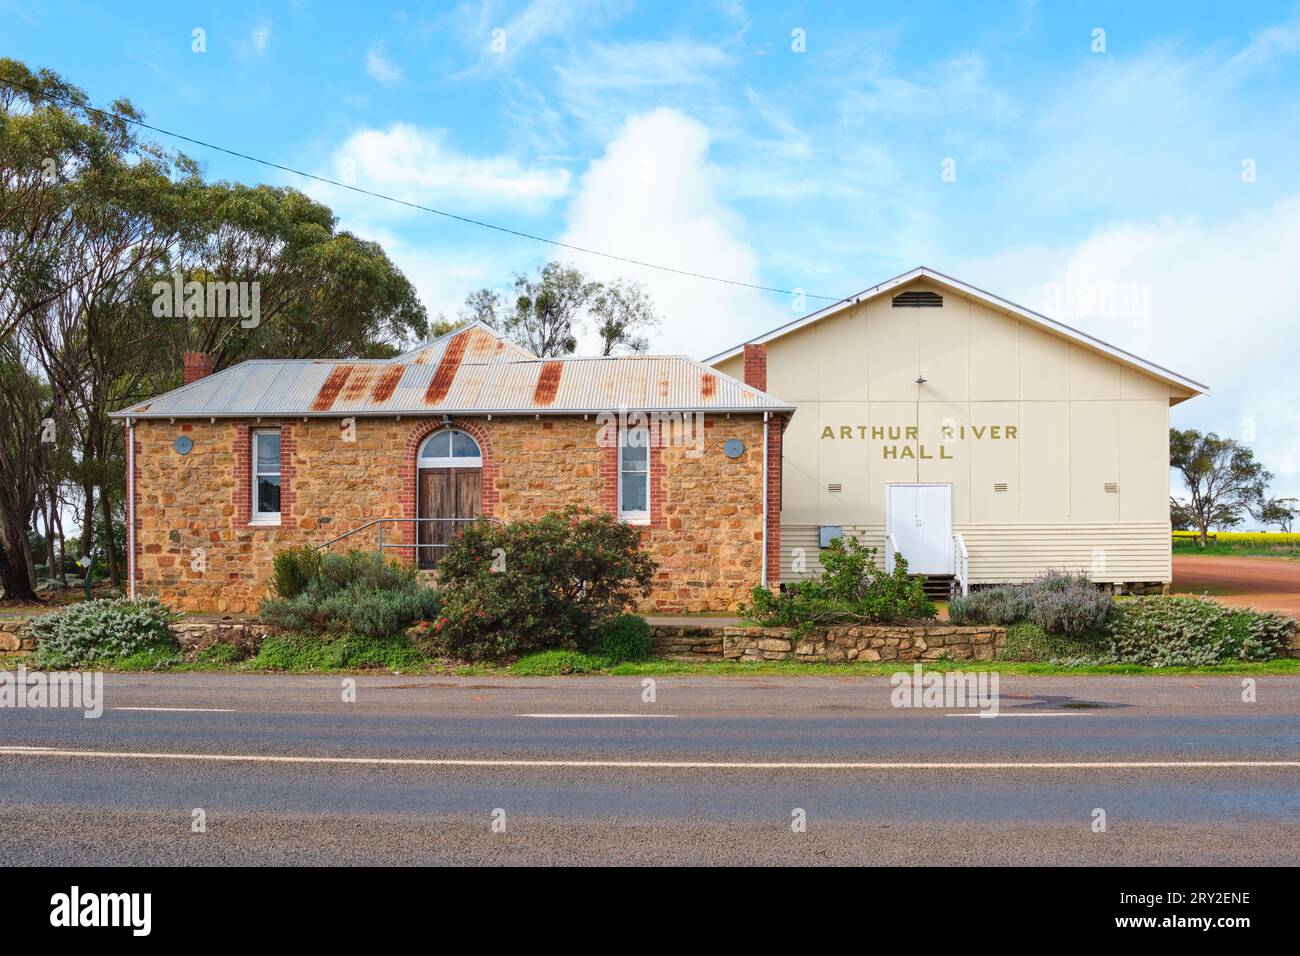 The historical Arthur River Hall located on Albany Highway in the small town of Arthur River in the Wheatbelt region of Western Australia. Stock Photo